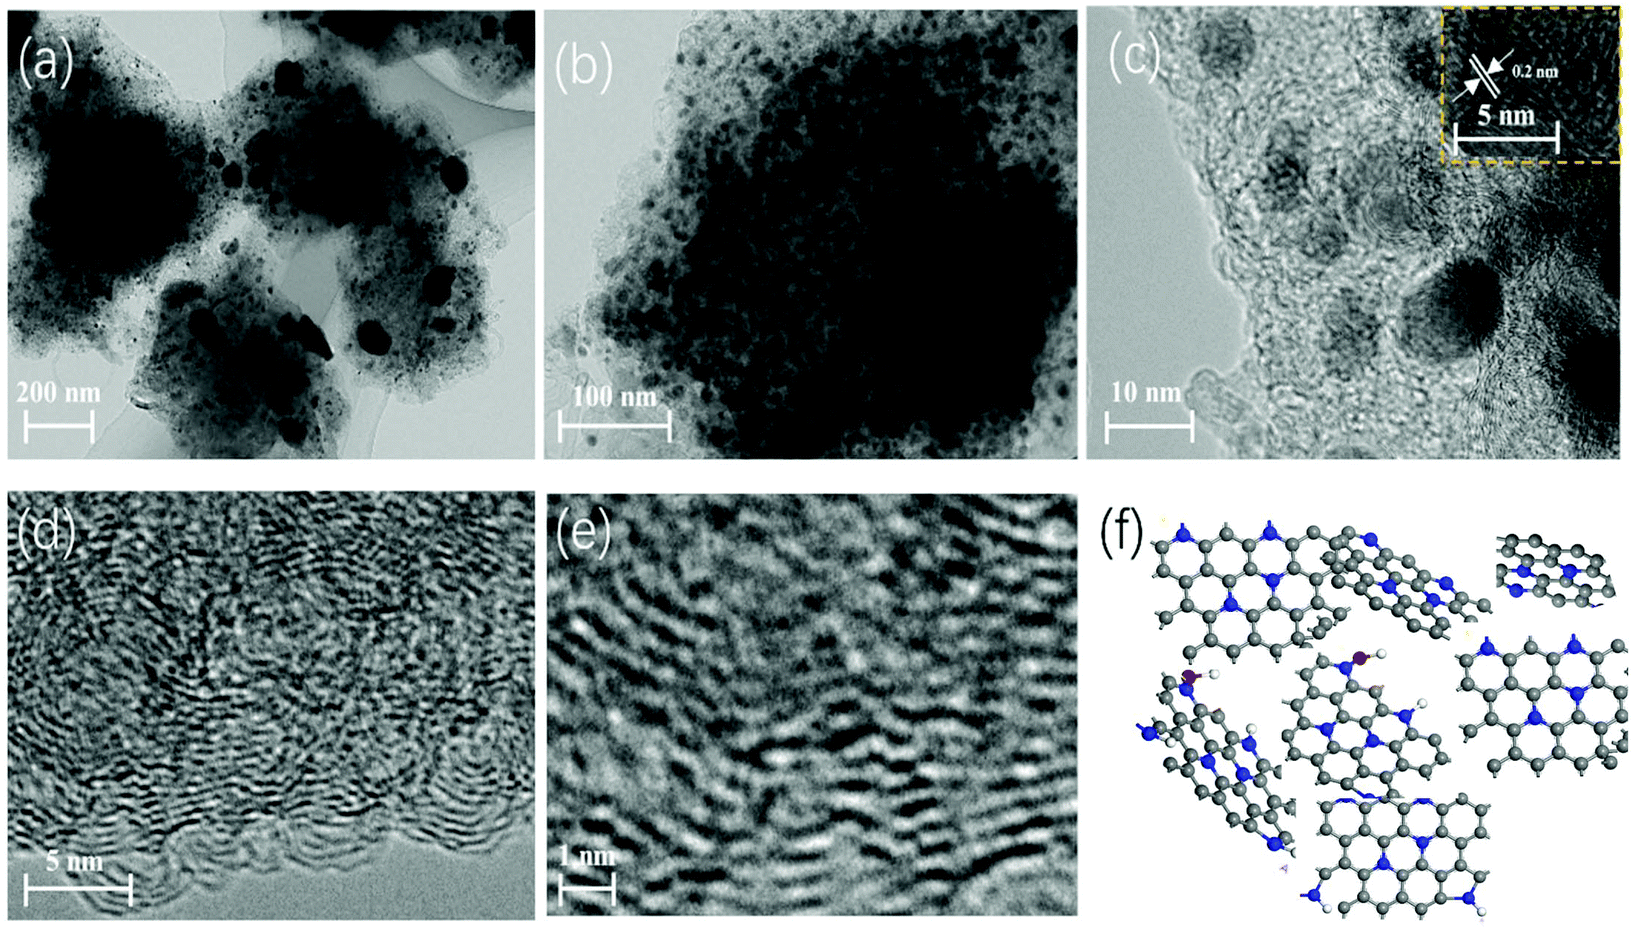 Highly Dispersed Co Nanoparticles Decorated On A N Doped Defective Carbon Nano Framework For A Hybrid Na Air Battery Dalton Transactions Rsc Publishing Doi 10 1039 C9dtk